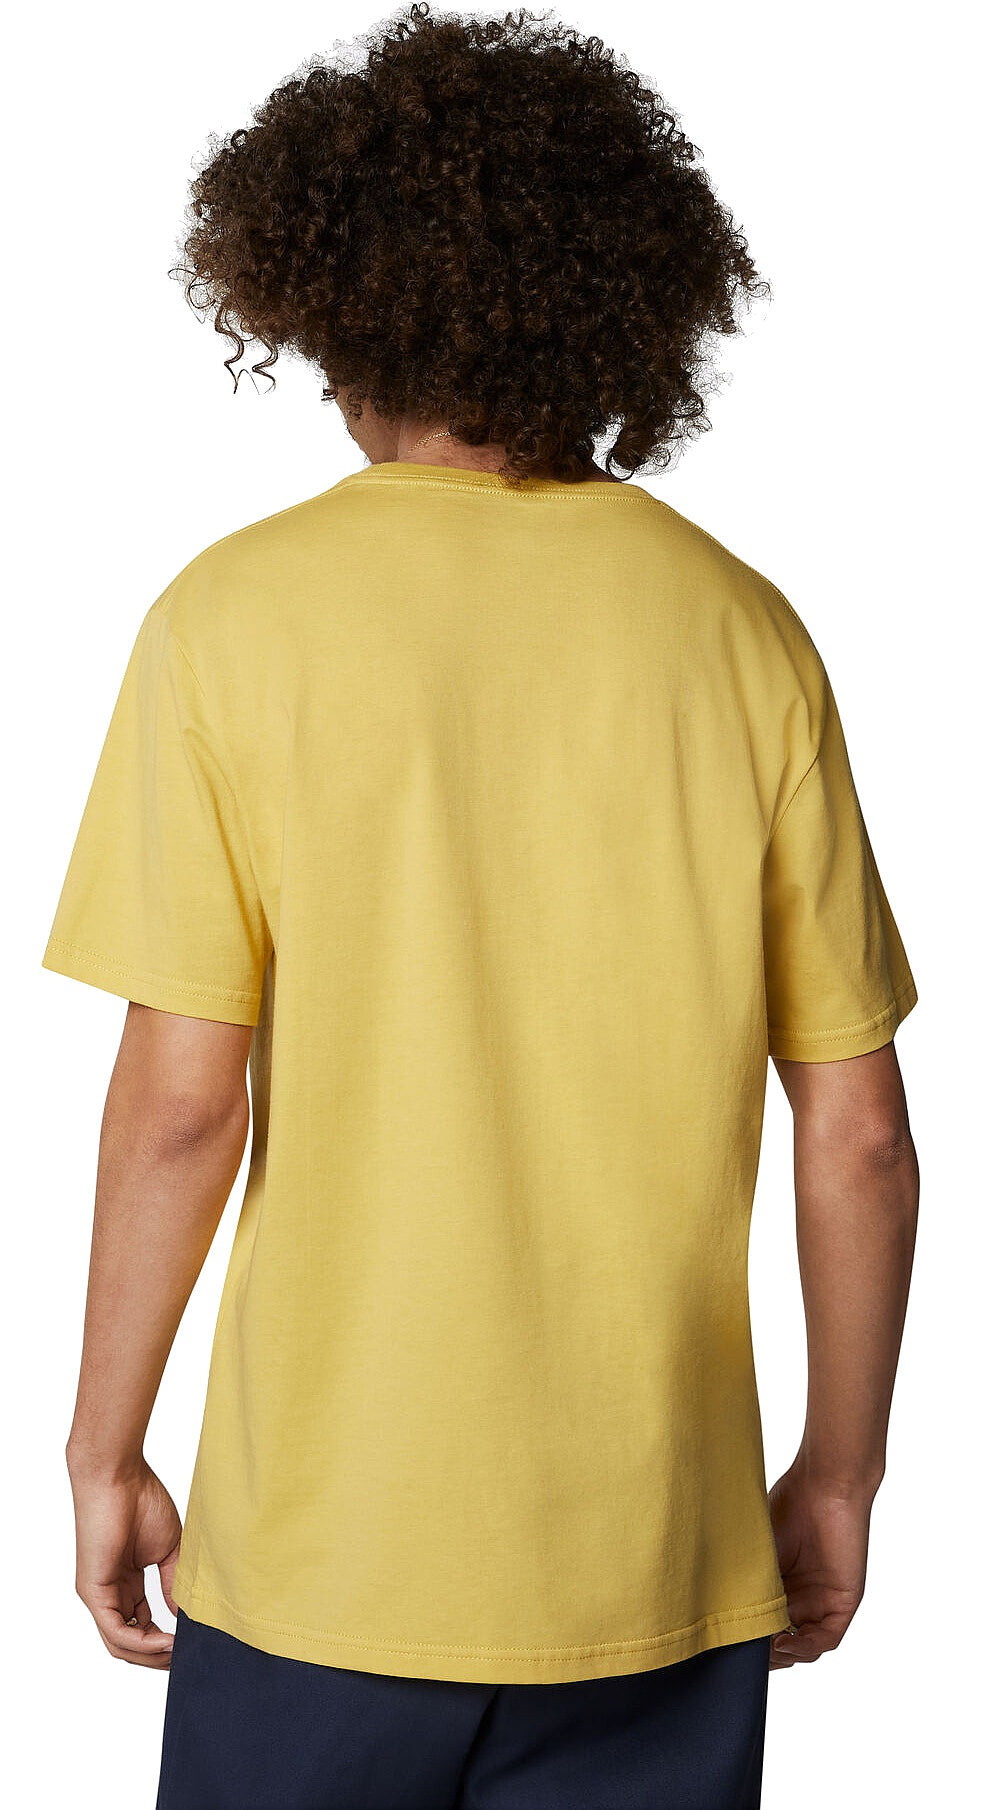 MENS CONVERSE YELLOW CHUCK PATCH TEE(10007887)-YELLOW